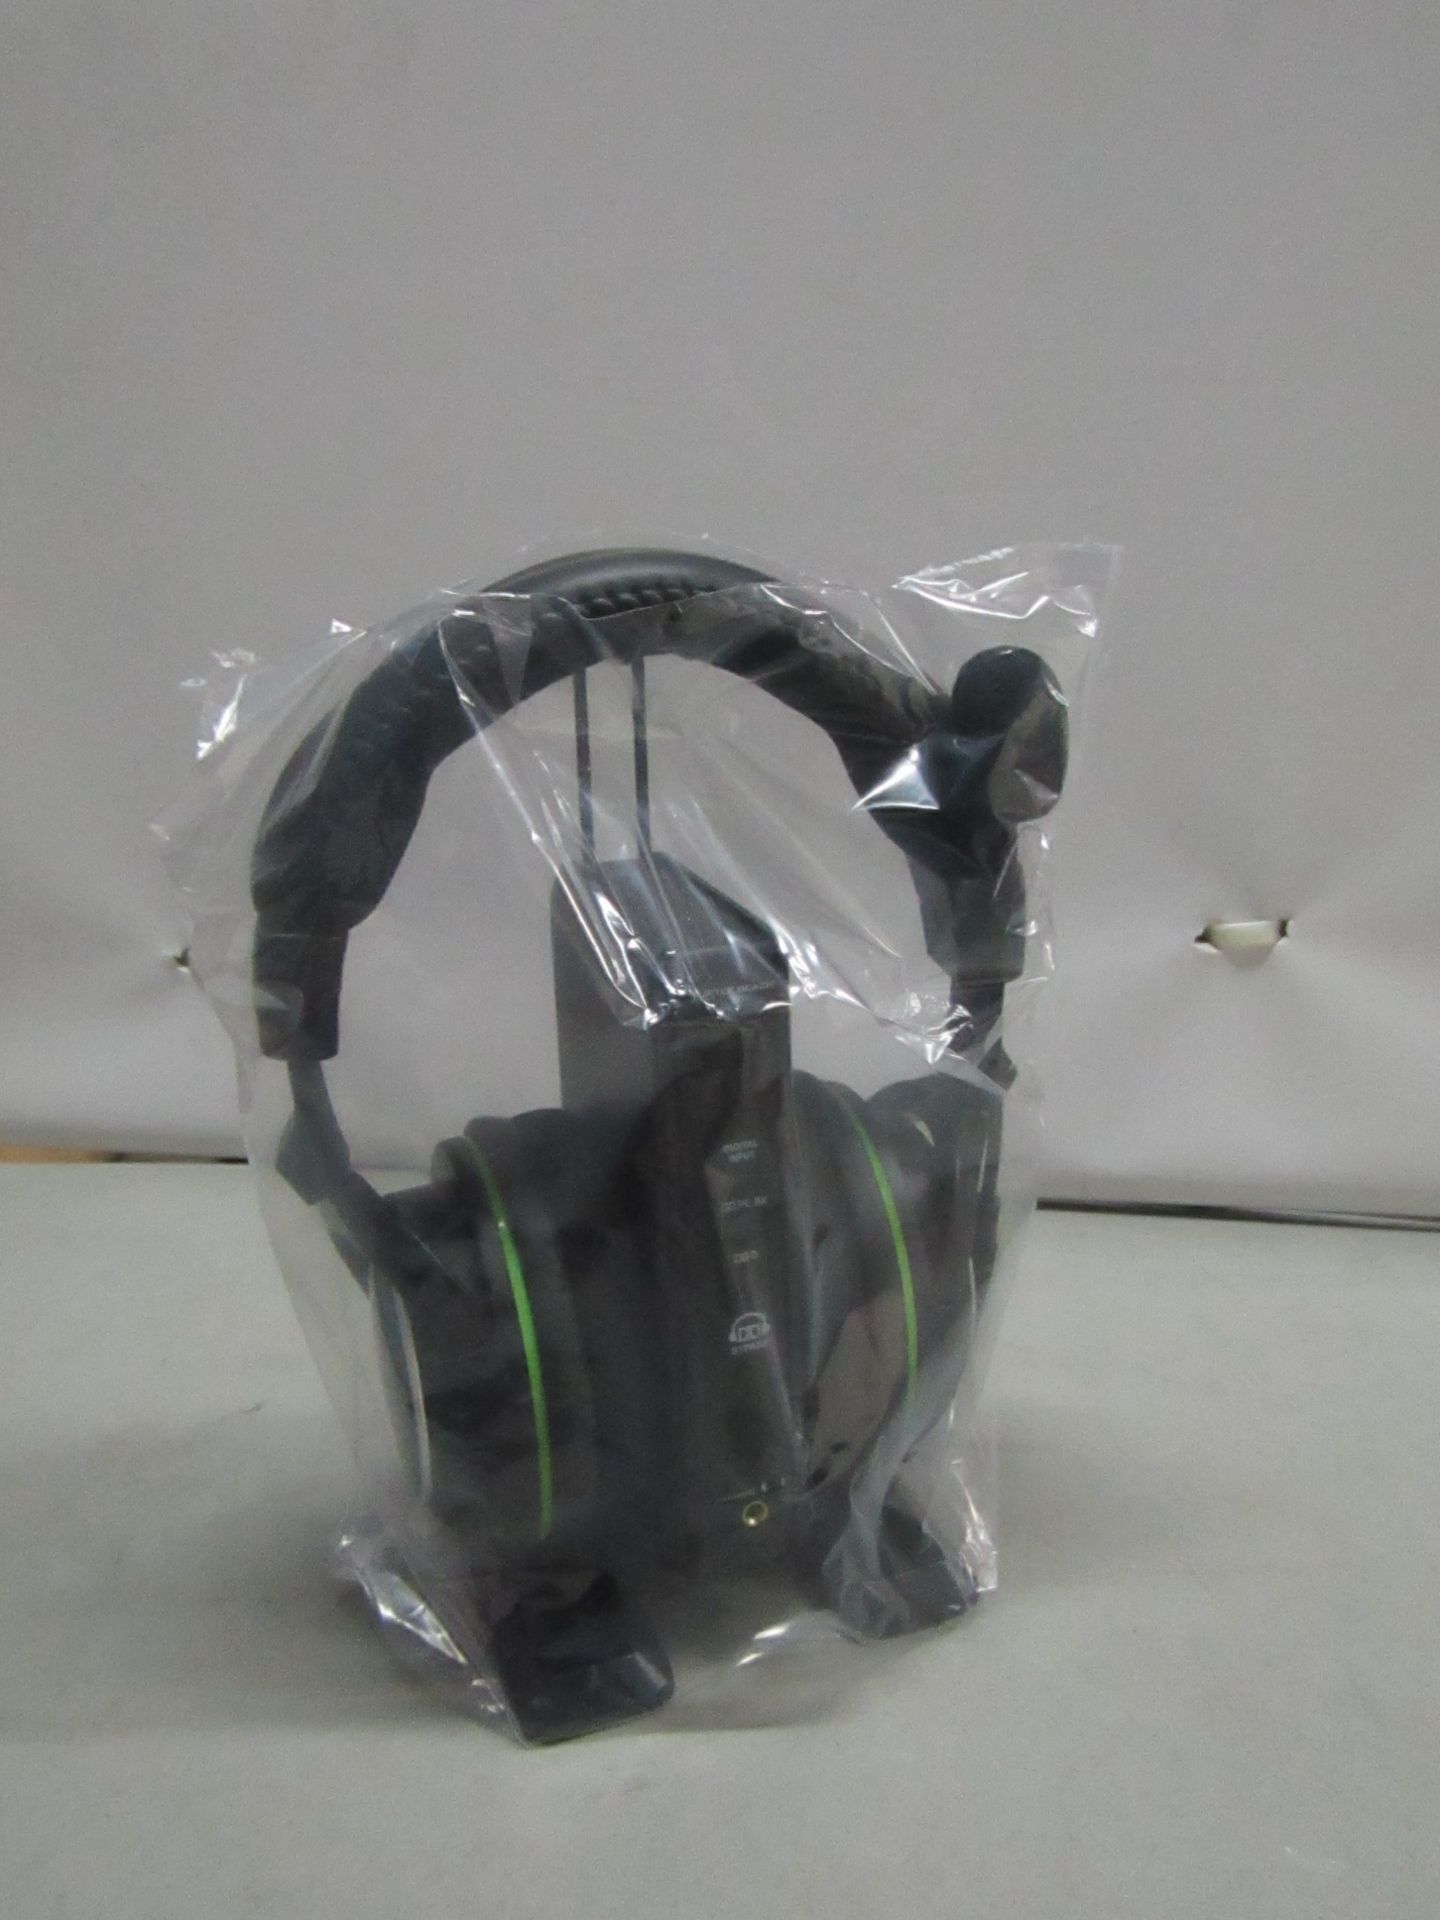 turtle beach xp500 gaming headset unchecked and boxed